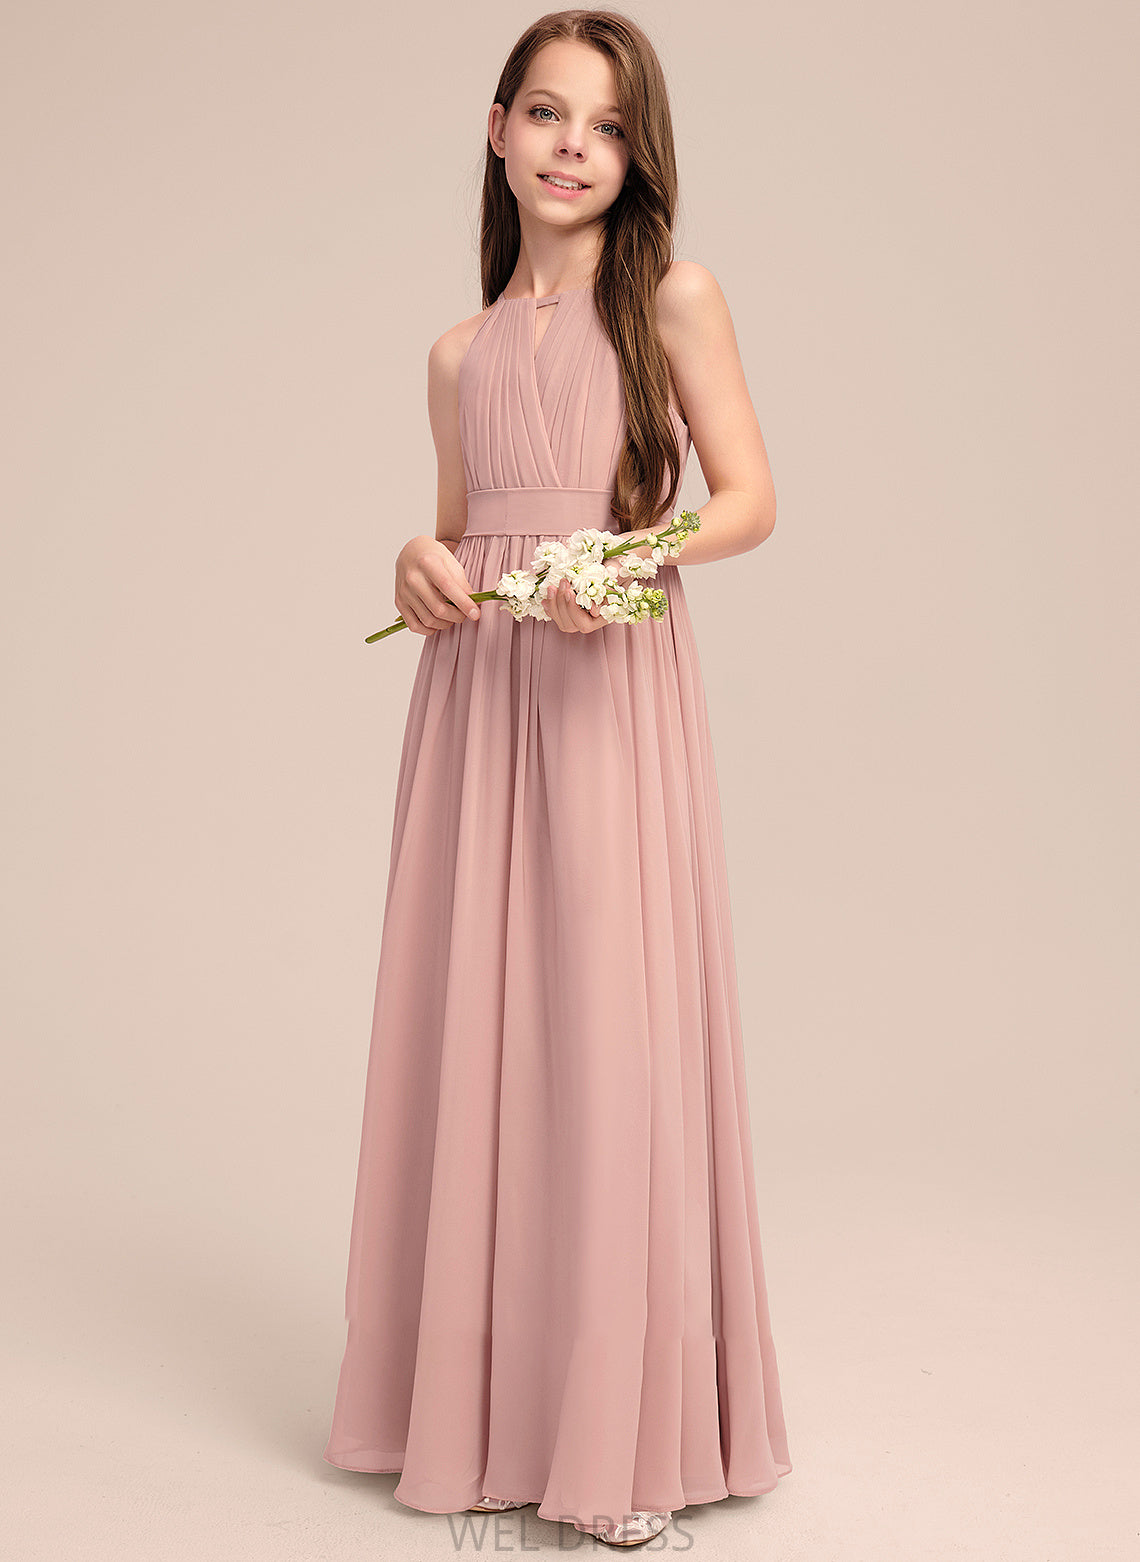 Junior Bridesmaid Dresses Bow(s) Neck A-Line Lacey Floor-Length With Chiffon Scoop Ruffle